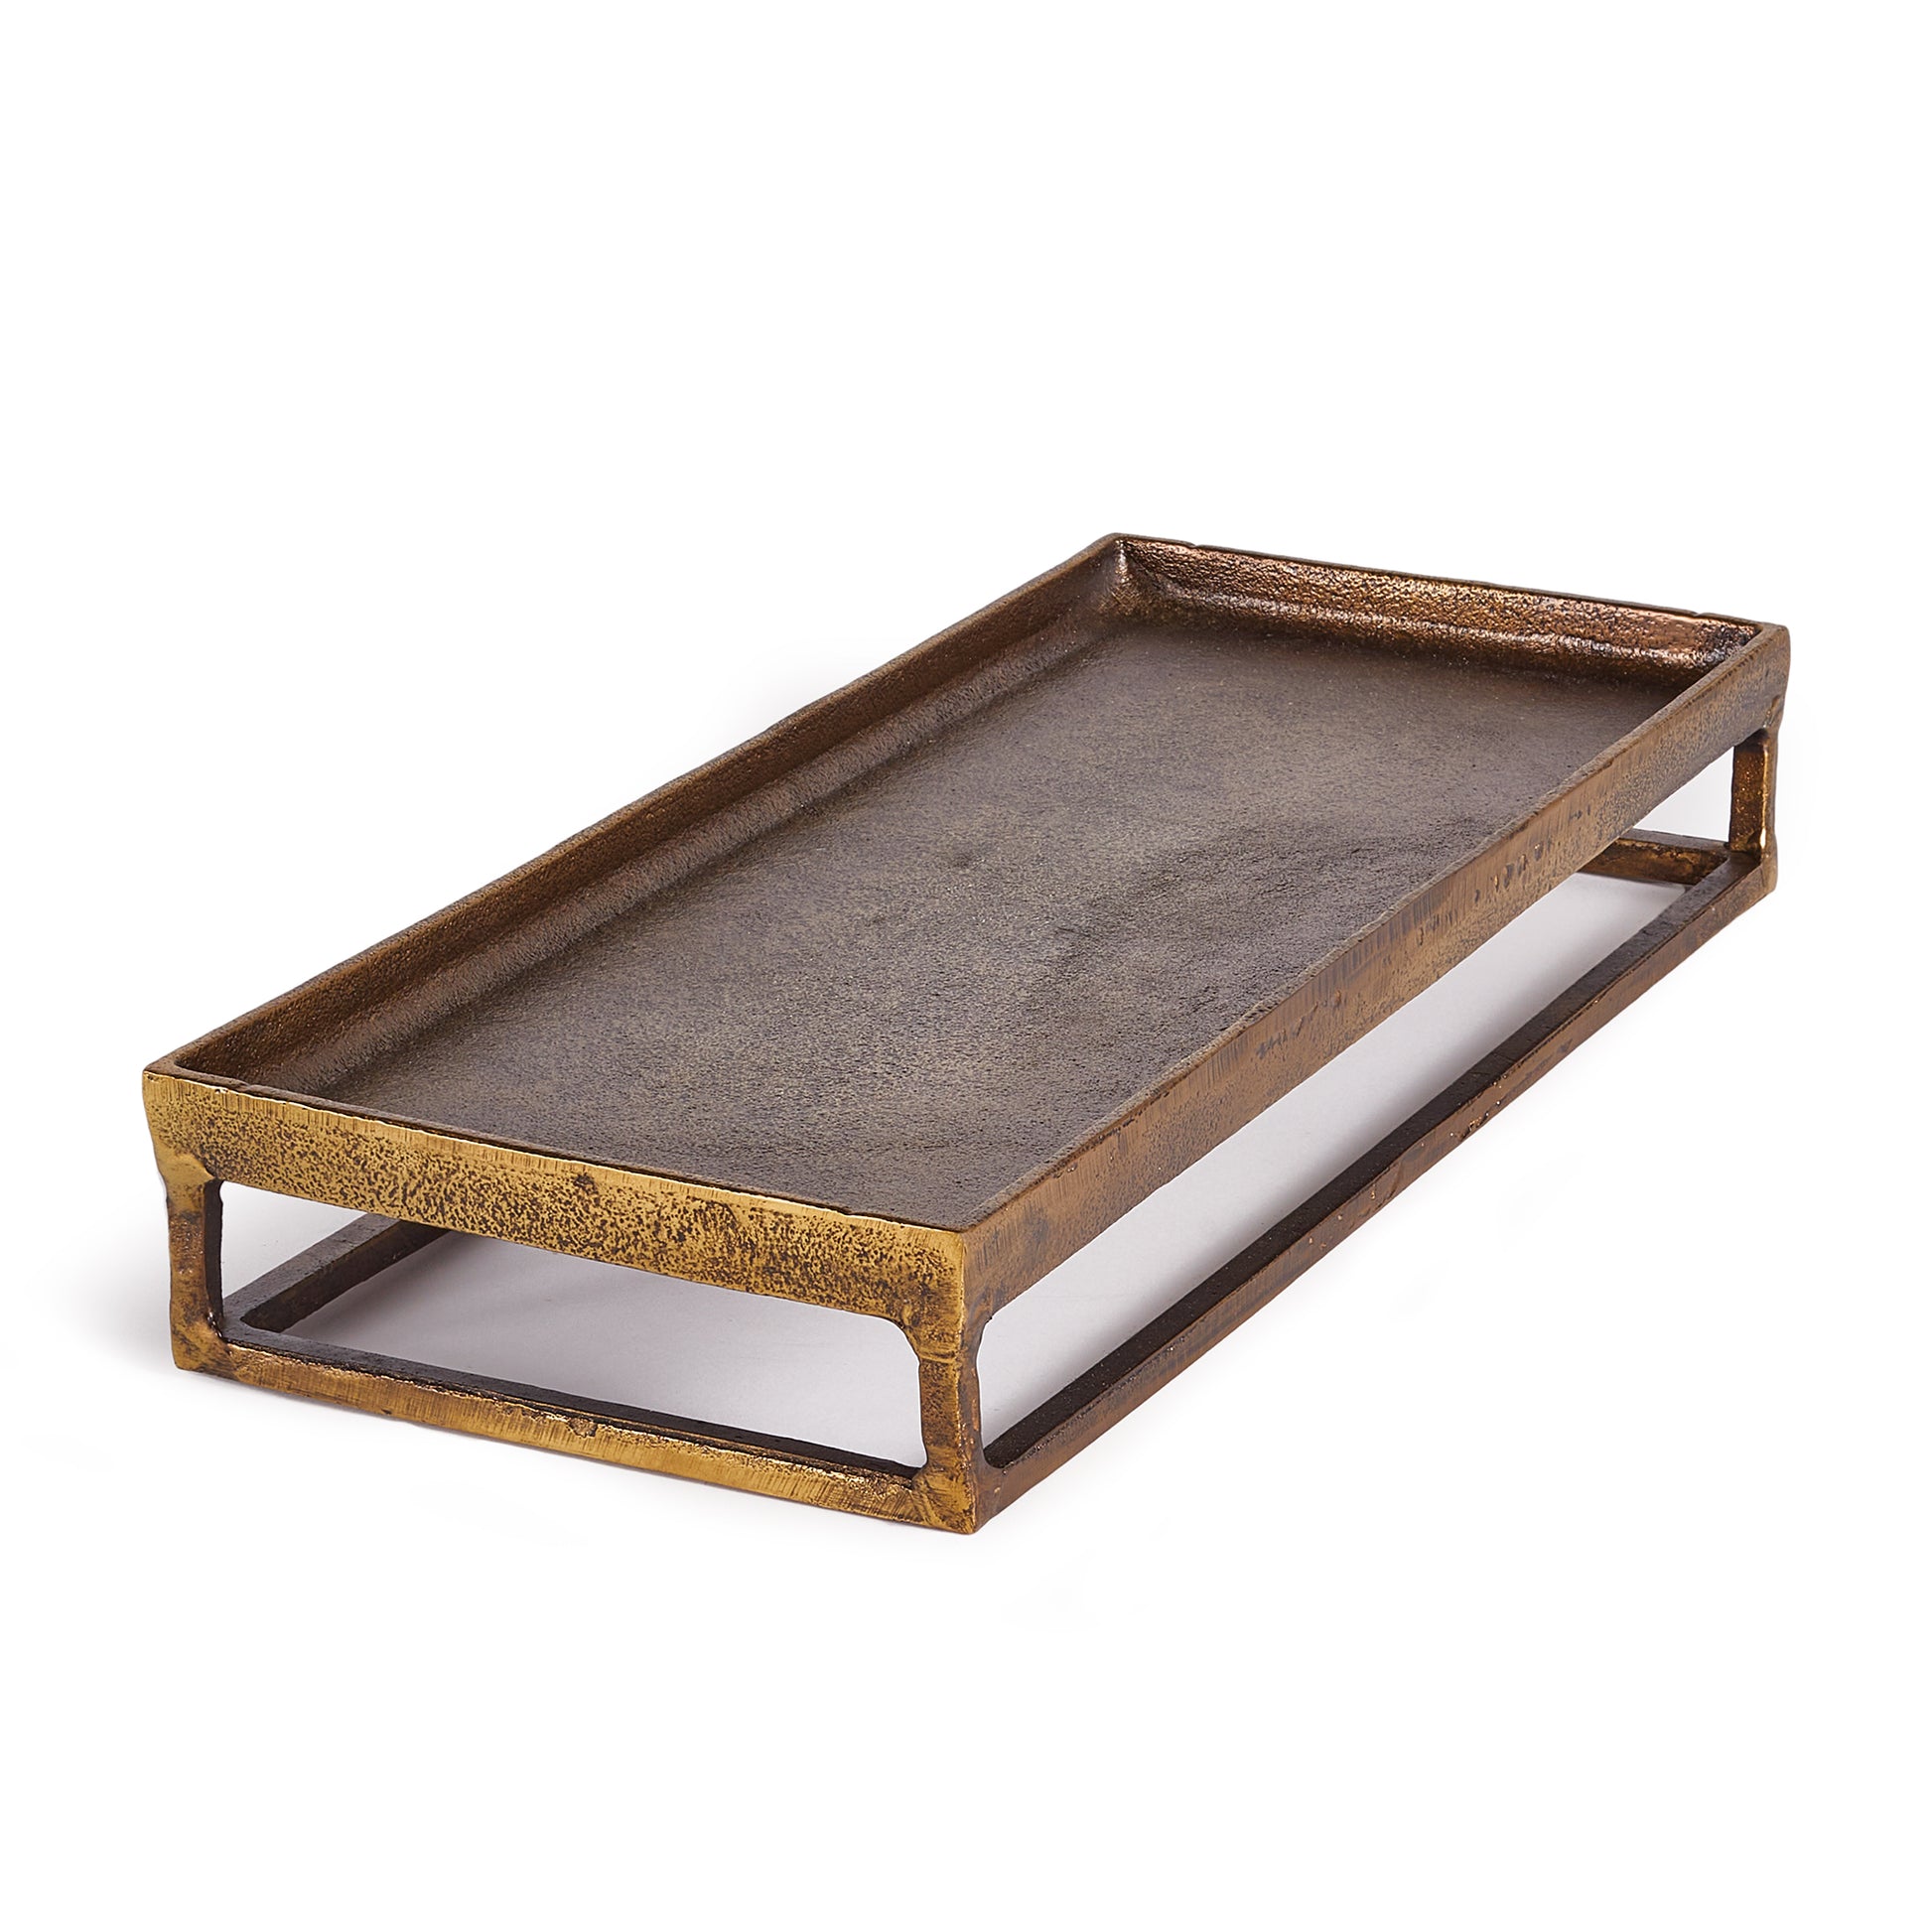 Made of solid cast aluminum and finished in a deep antique brass, the Cabot Raised Rectangular Tray elevates your objets. Perfect decorative tray for kitchen island or coffee table.